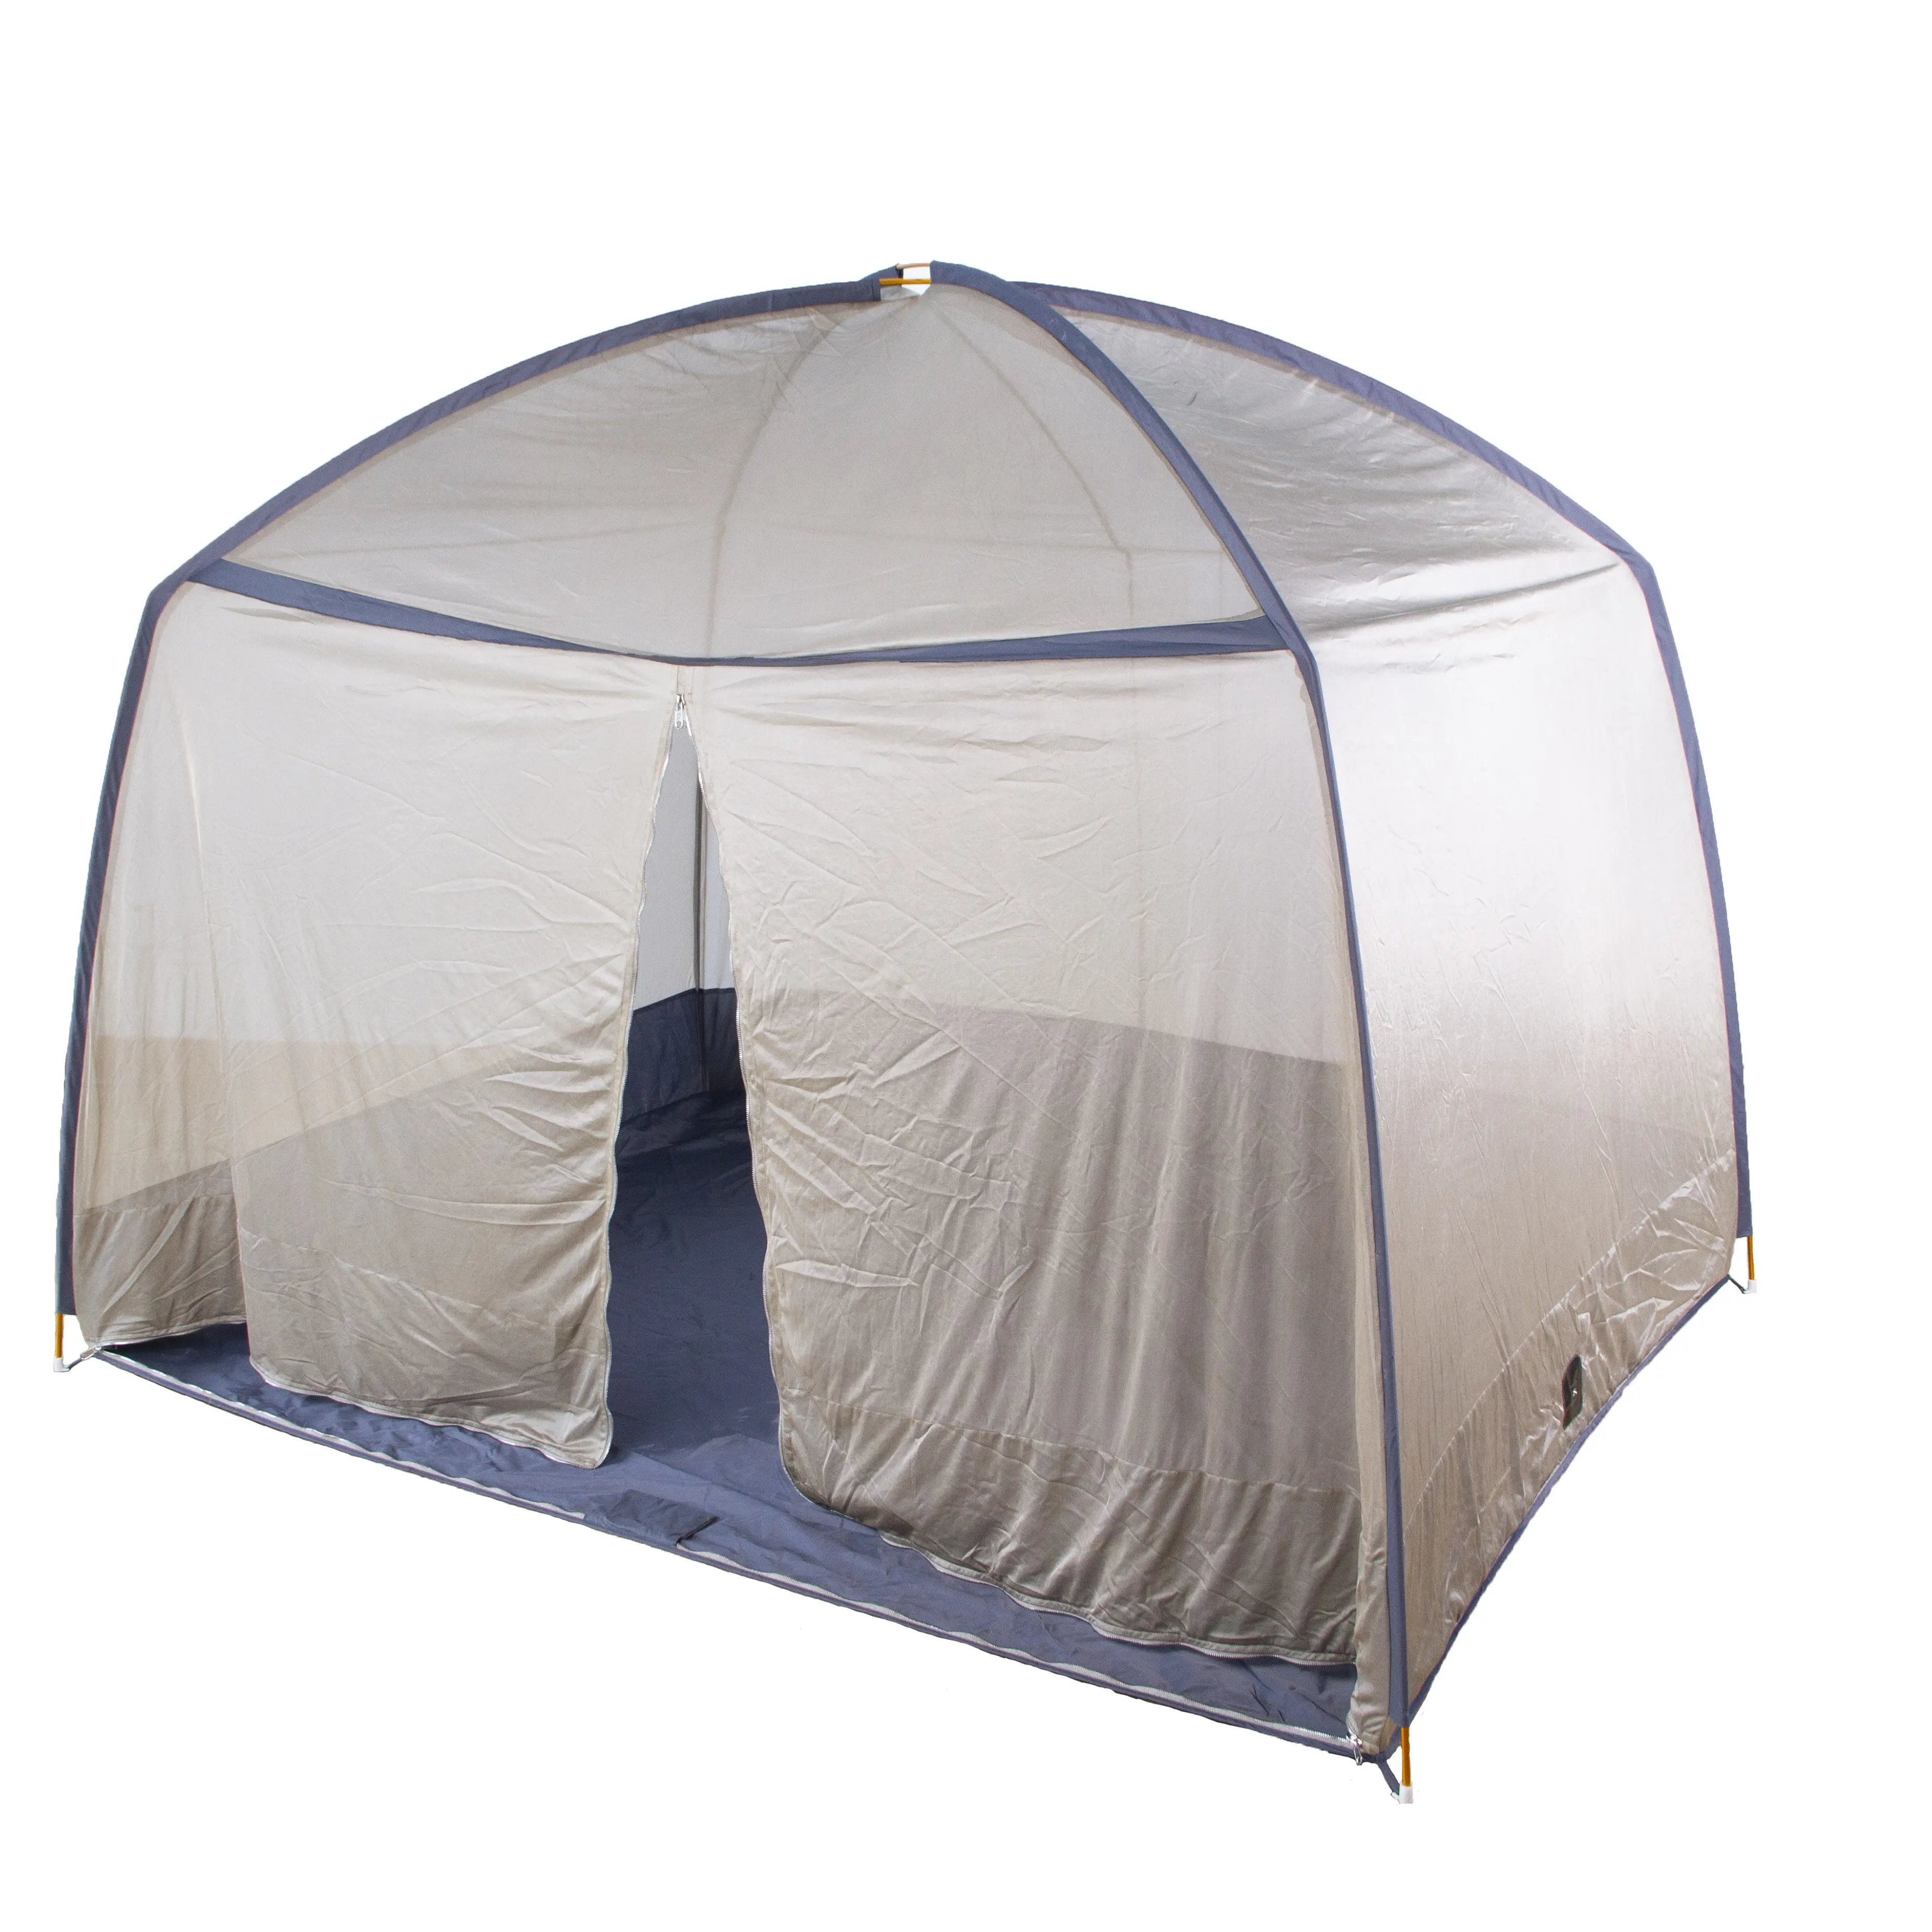 Urgarding folding double bed anti radiation tent mesh emf shielding bed mosquito net tent with bottom EMF shielding layer